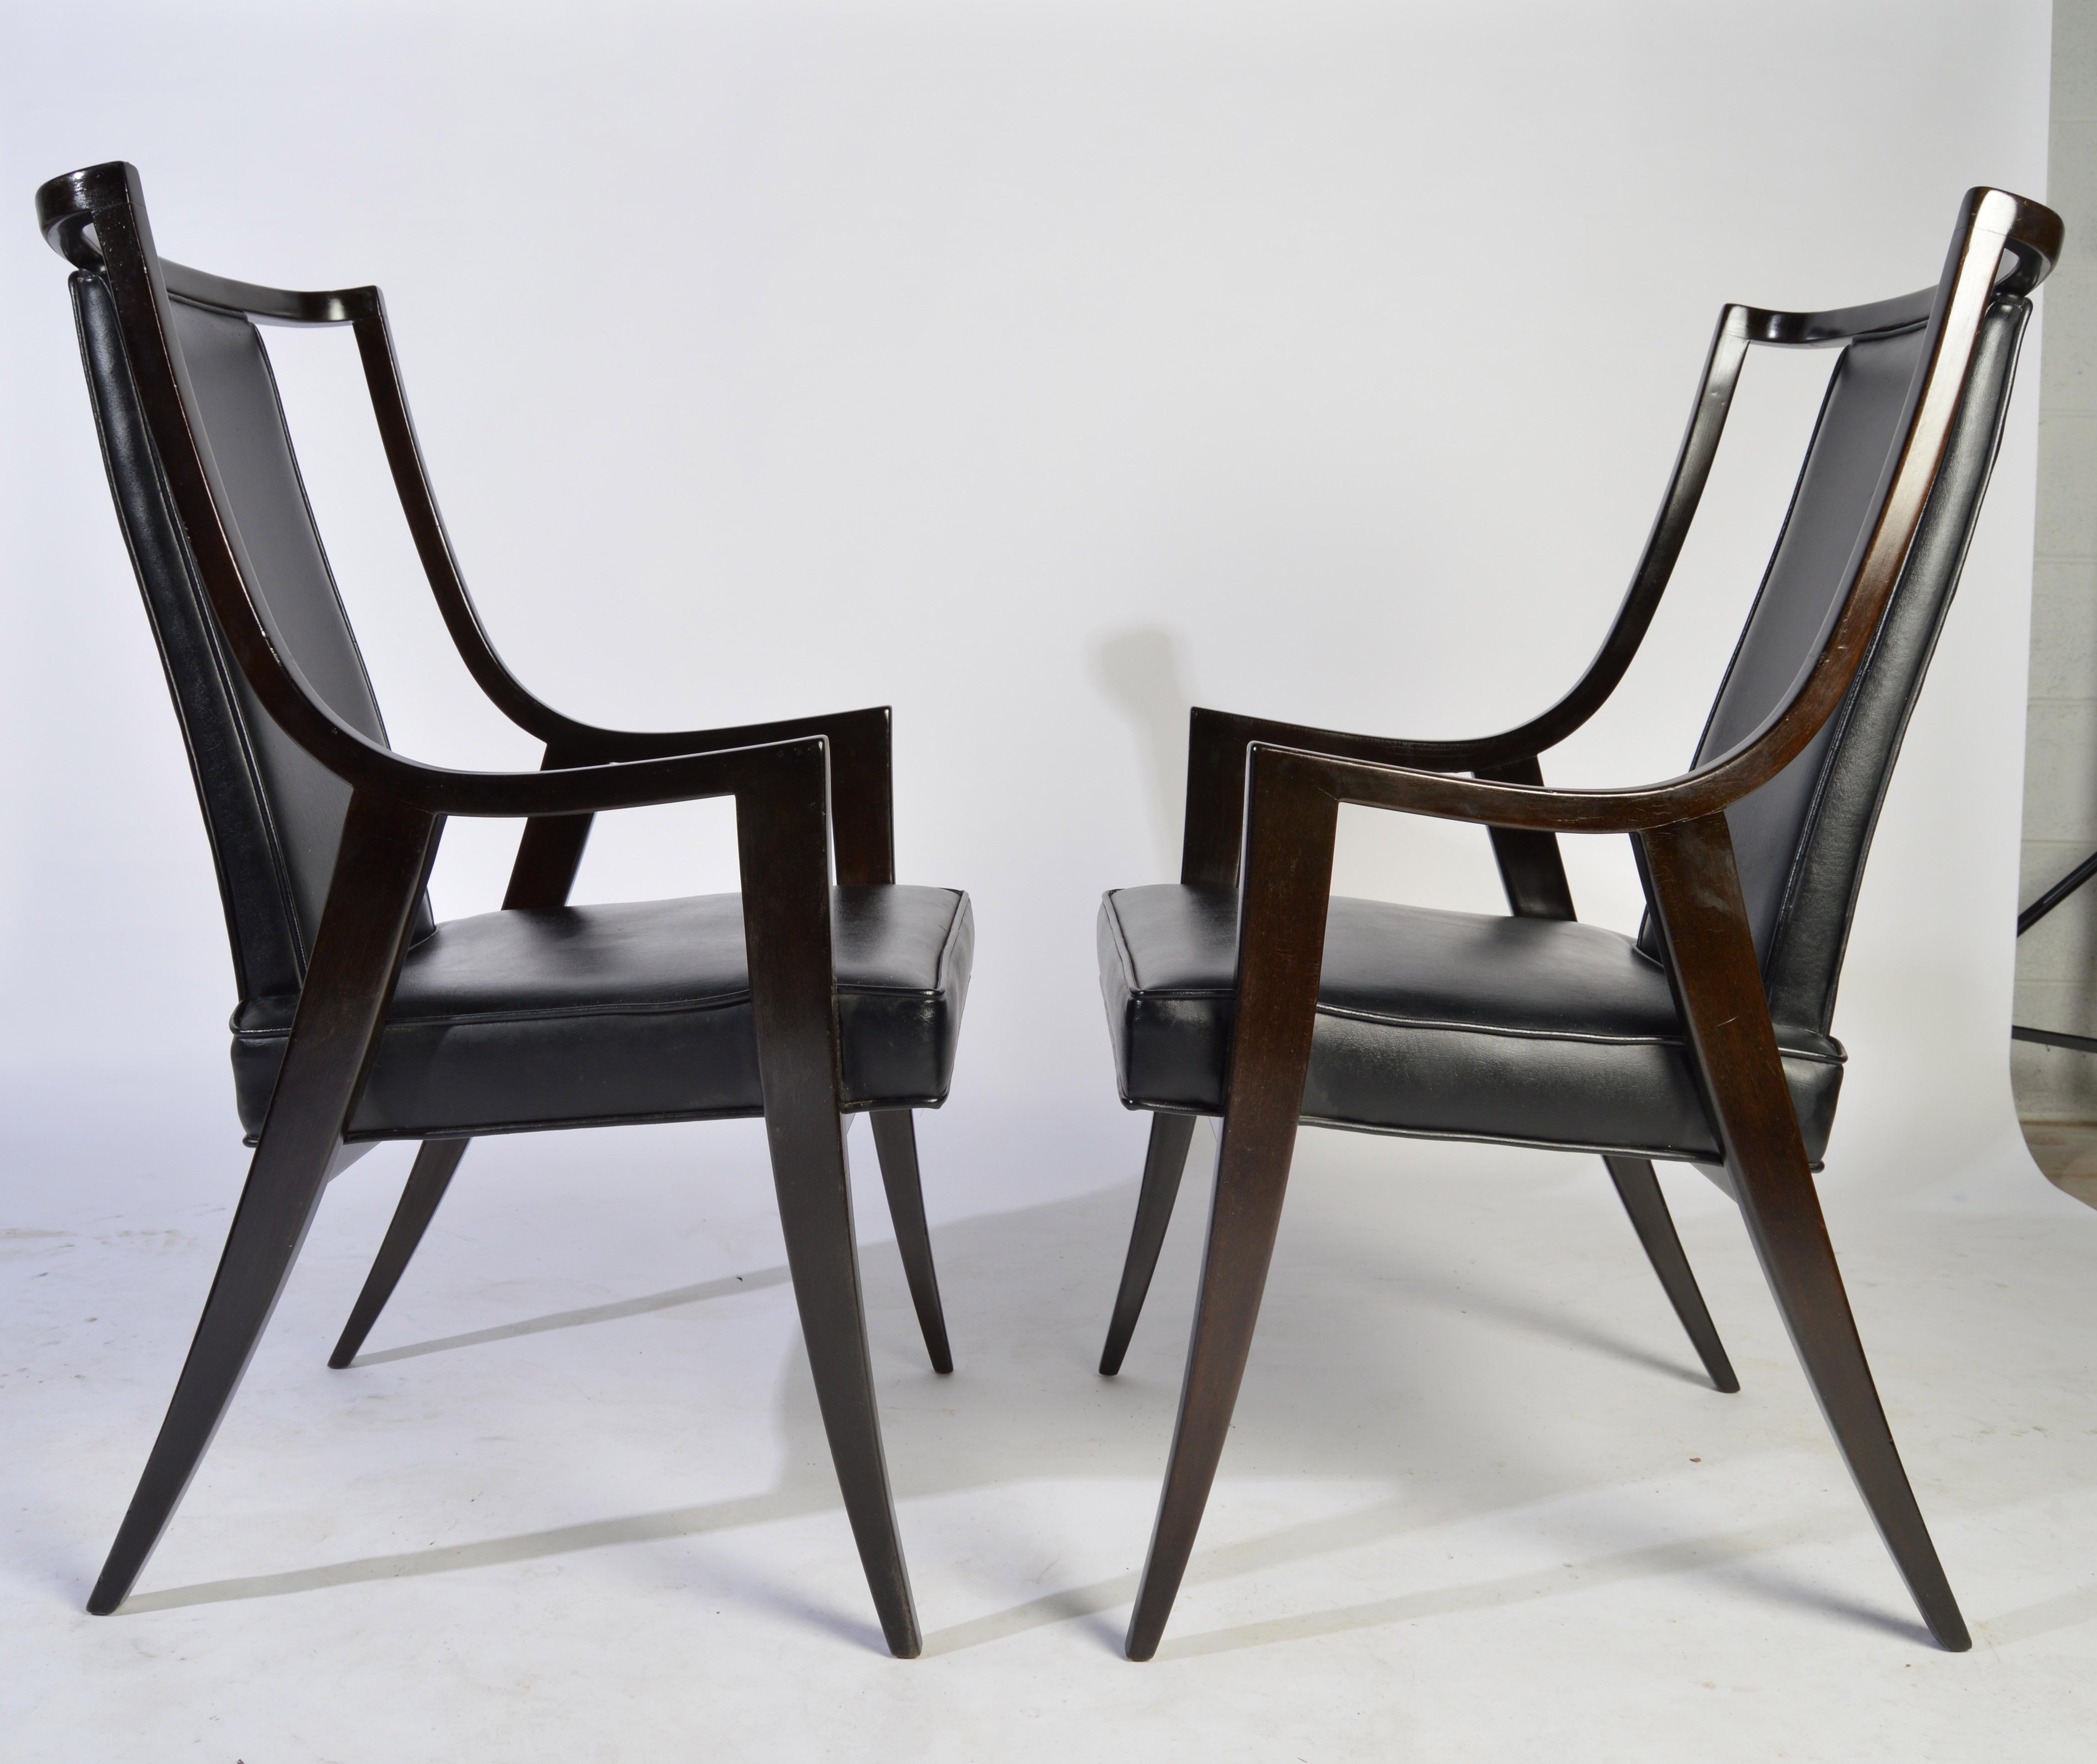 An elegant pair of original model 1055A “Classic” Harvey Probber dining armchair’s.
Considered one of Harvey Probber’s most important chair designs the gentle curve of the back makes these very formfitting and comfortable.
Measures: H 38”
W